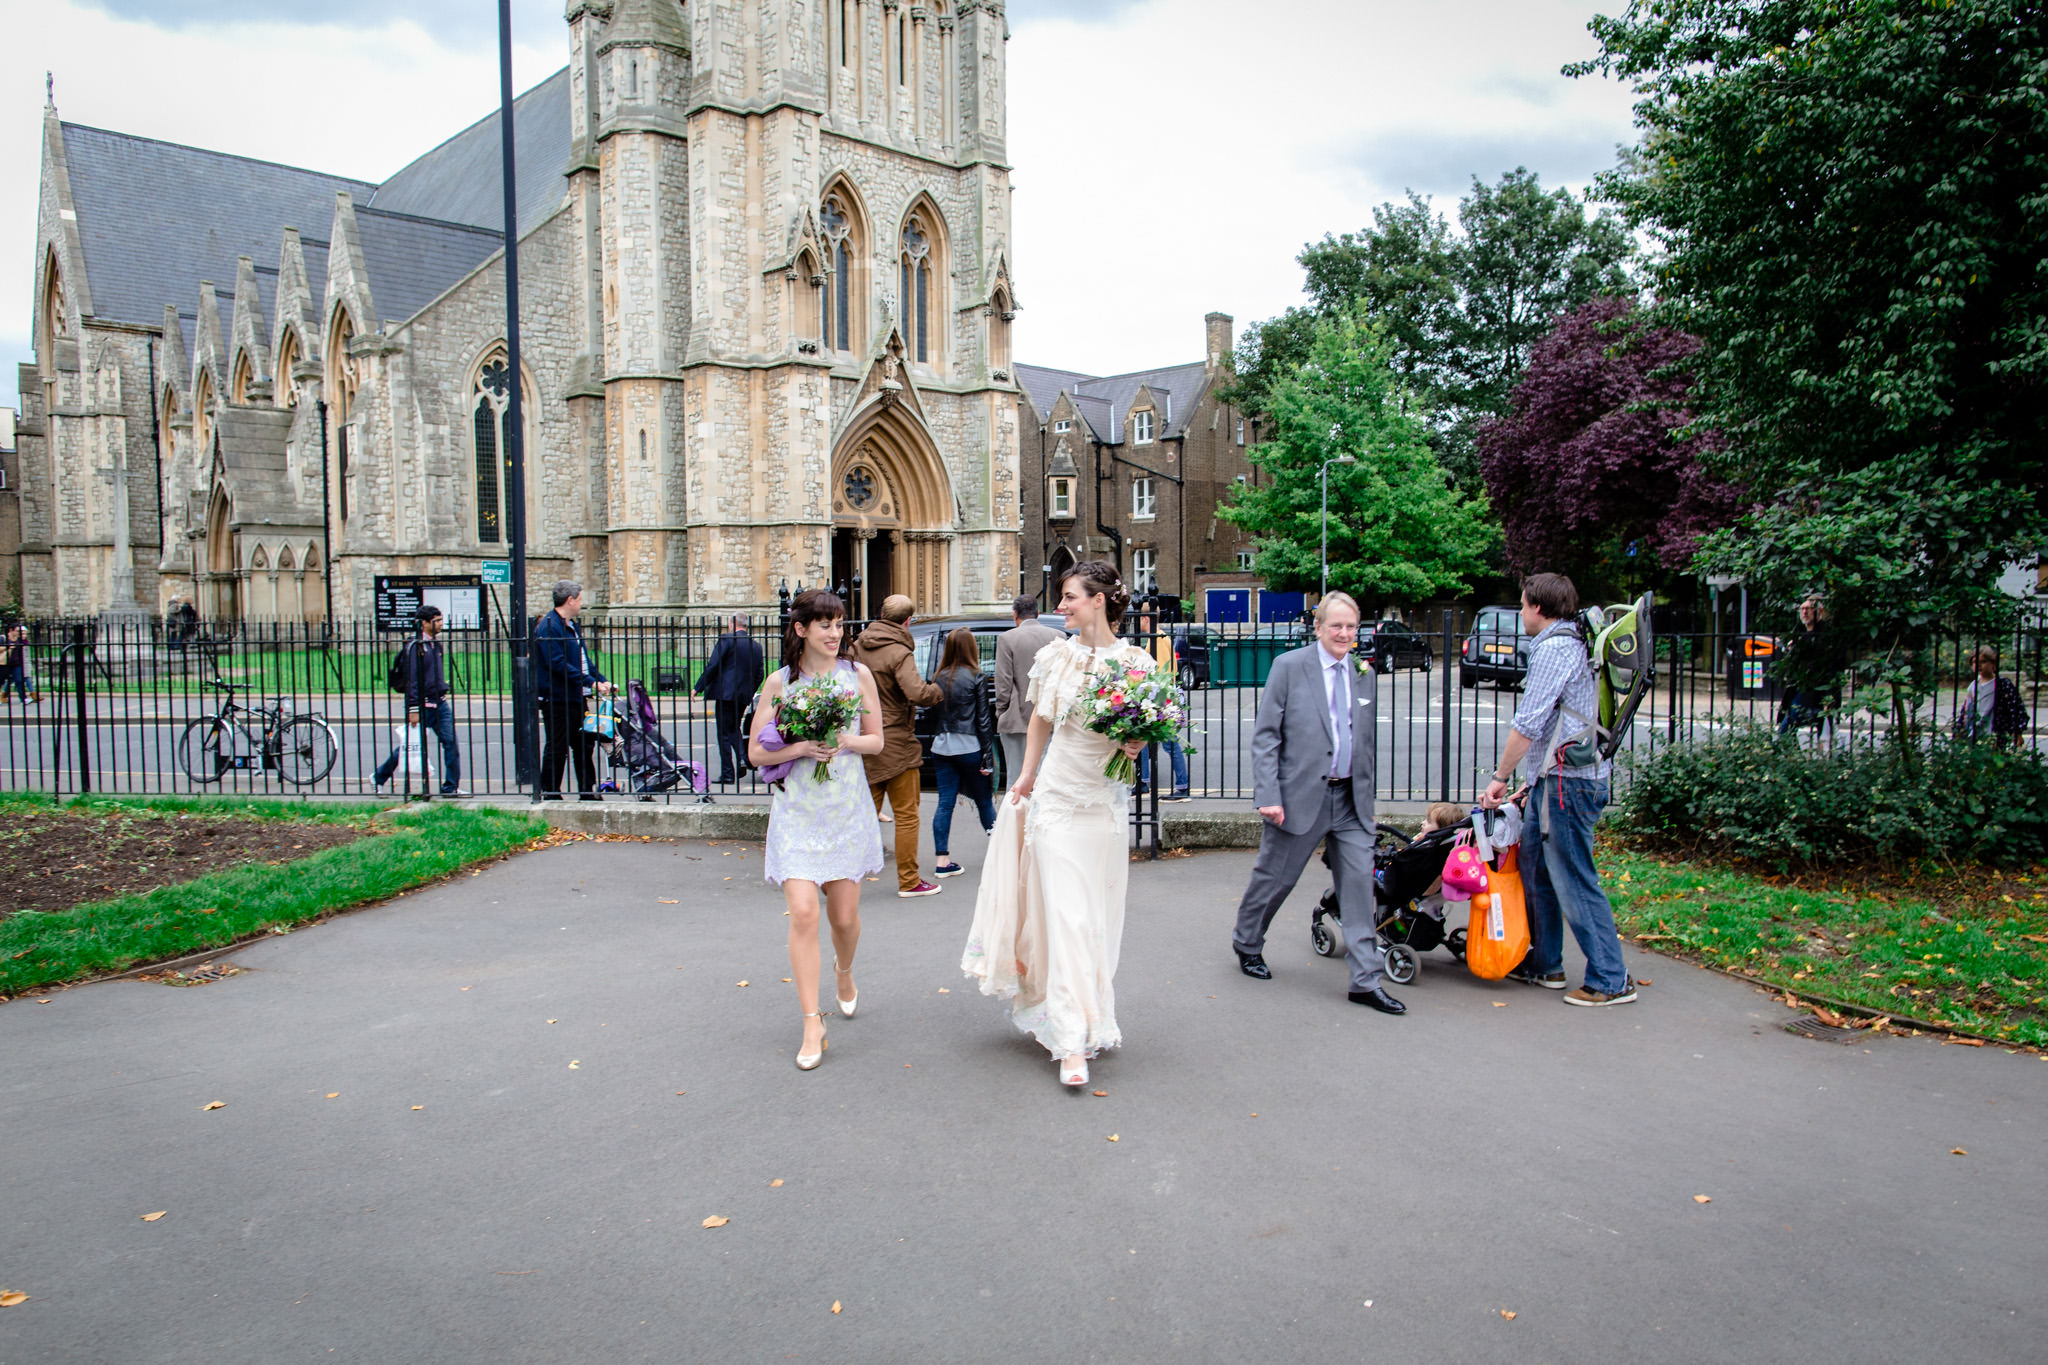 Clissold House wedding bride walks in front of the car